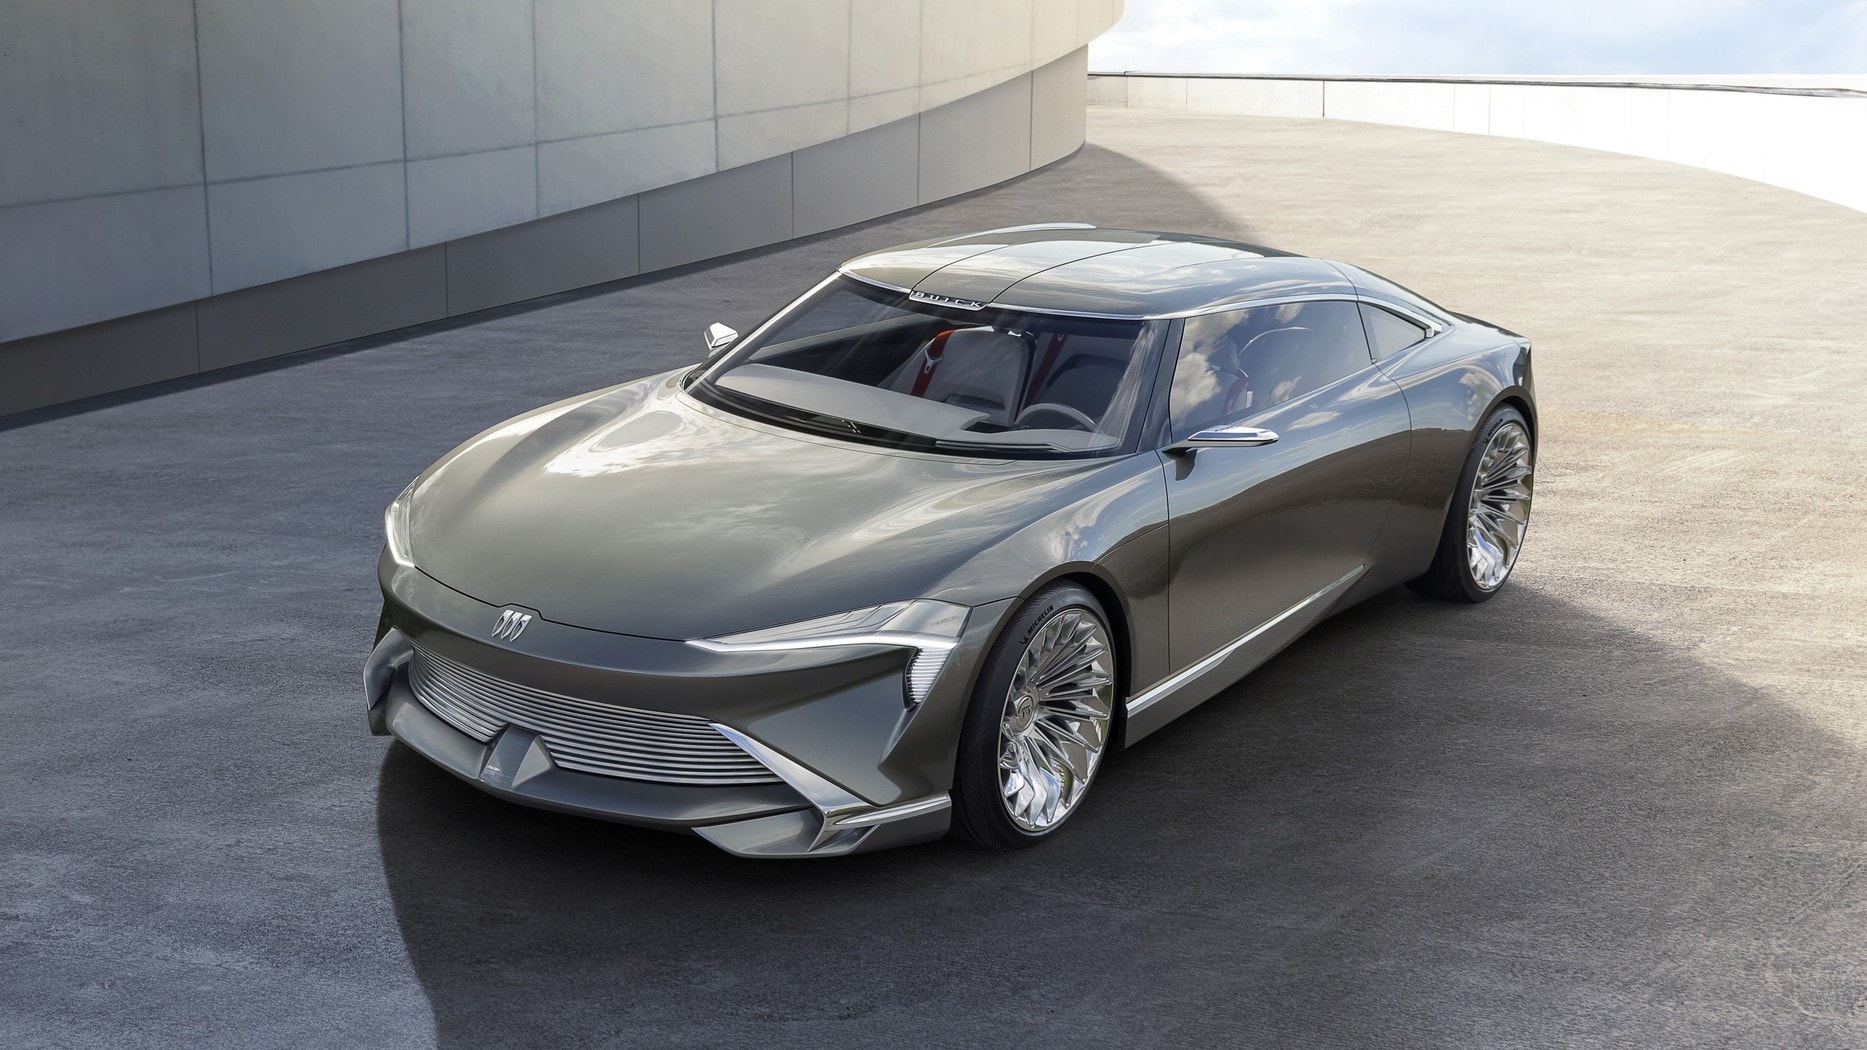 Buick Presents the Wildcat EV Concept and Plans to Go Electric From